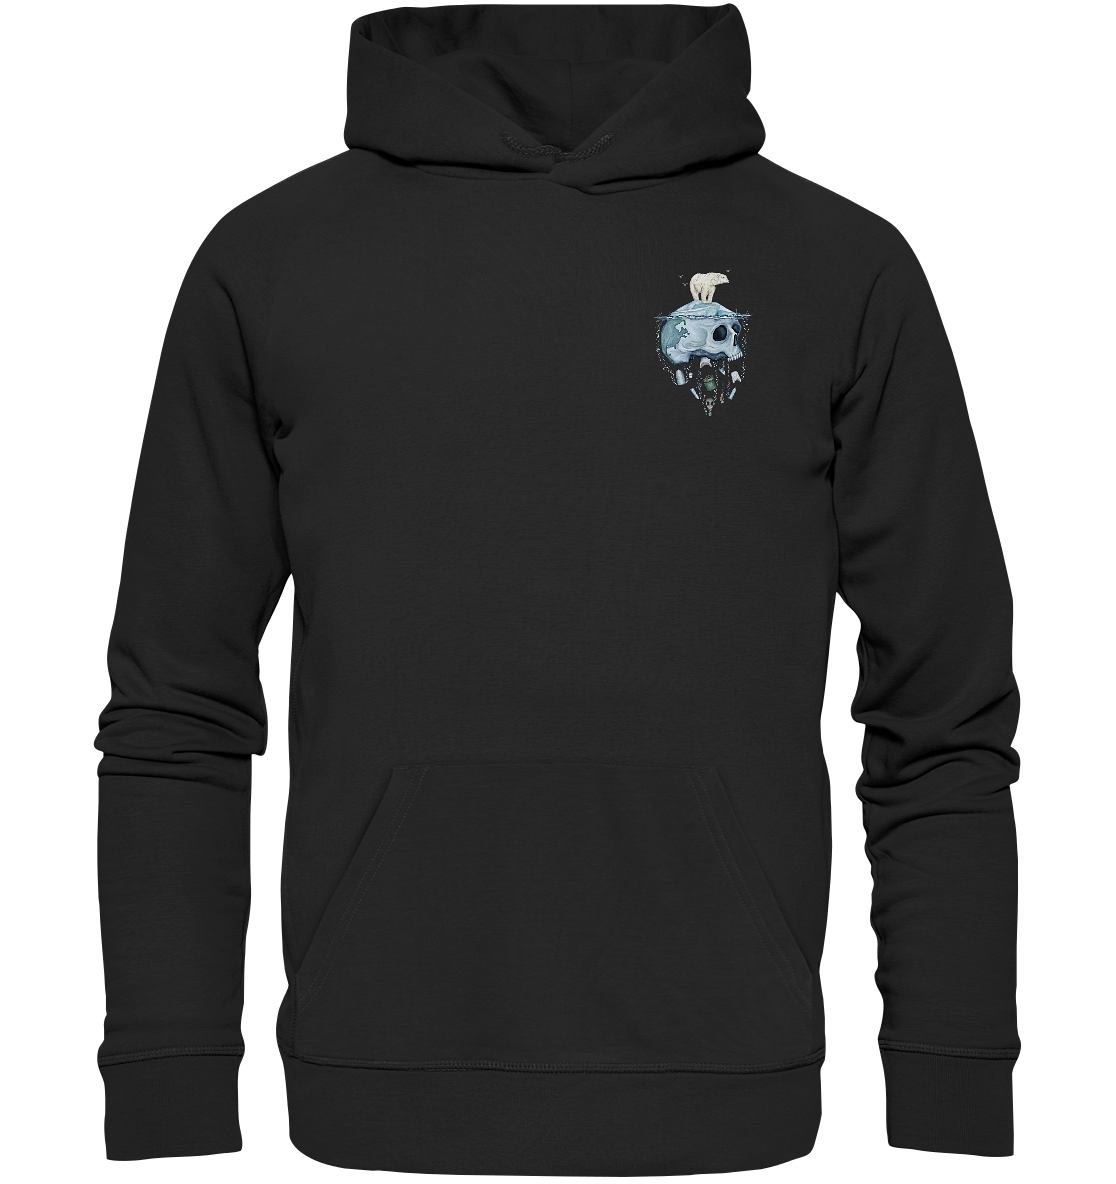 front-organic-hoodie-272727-1116x.png